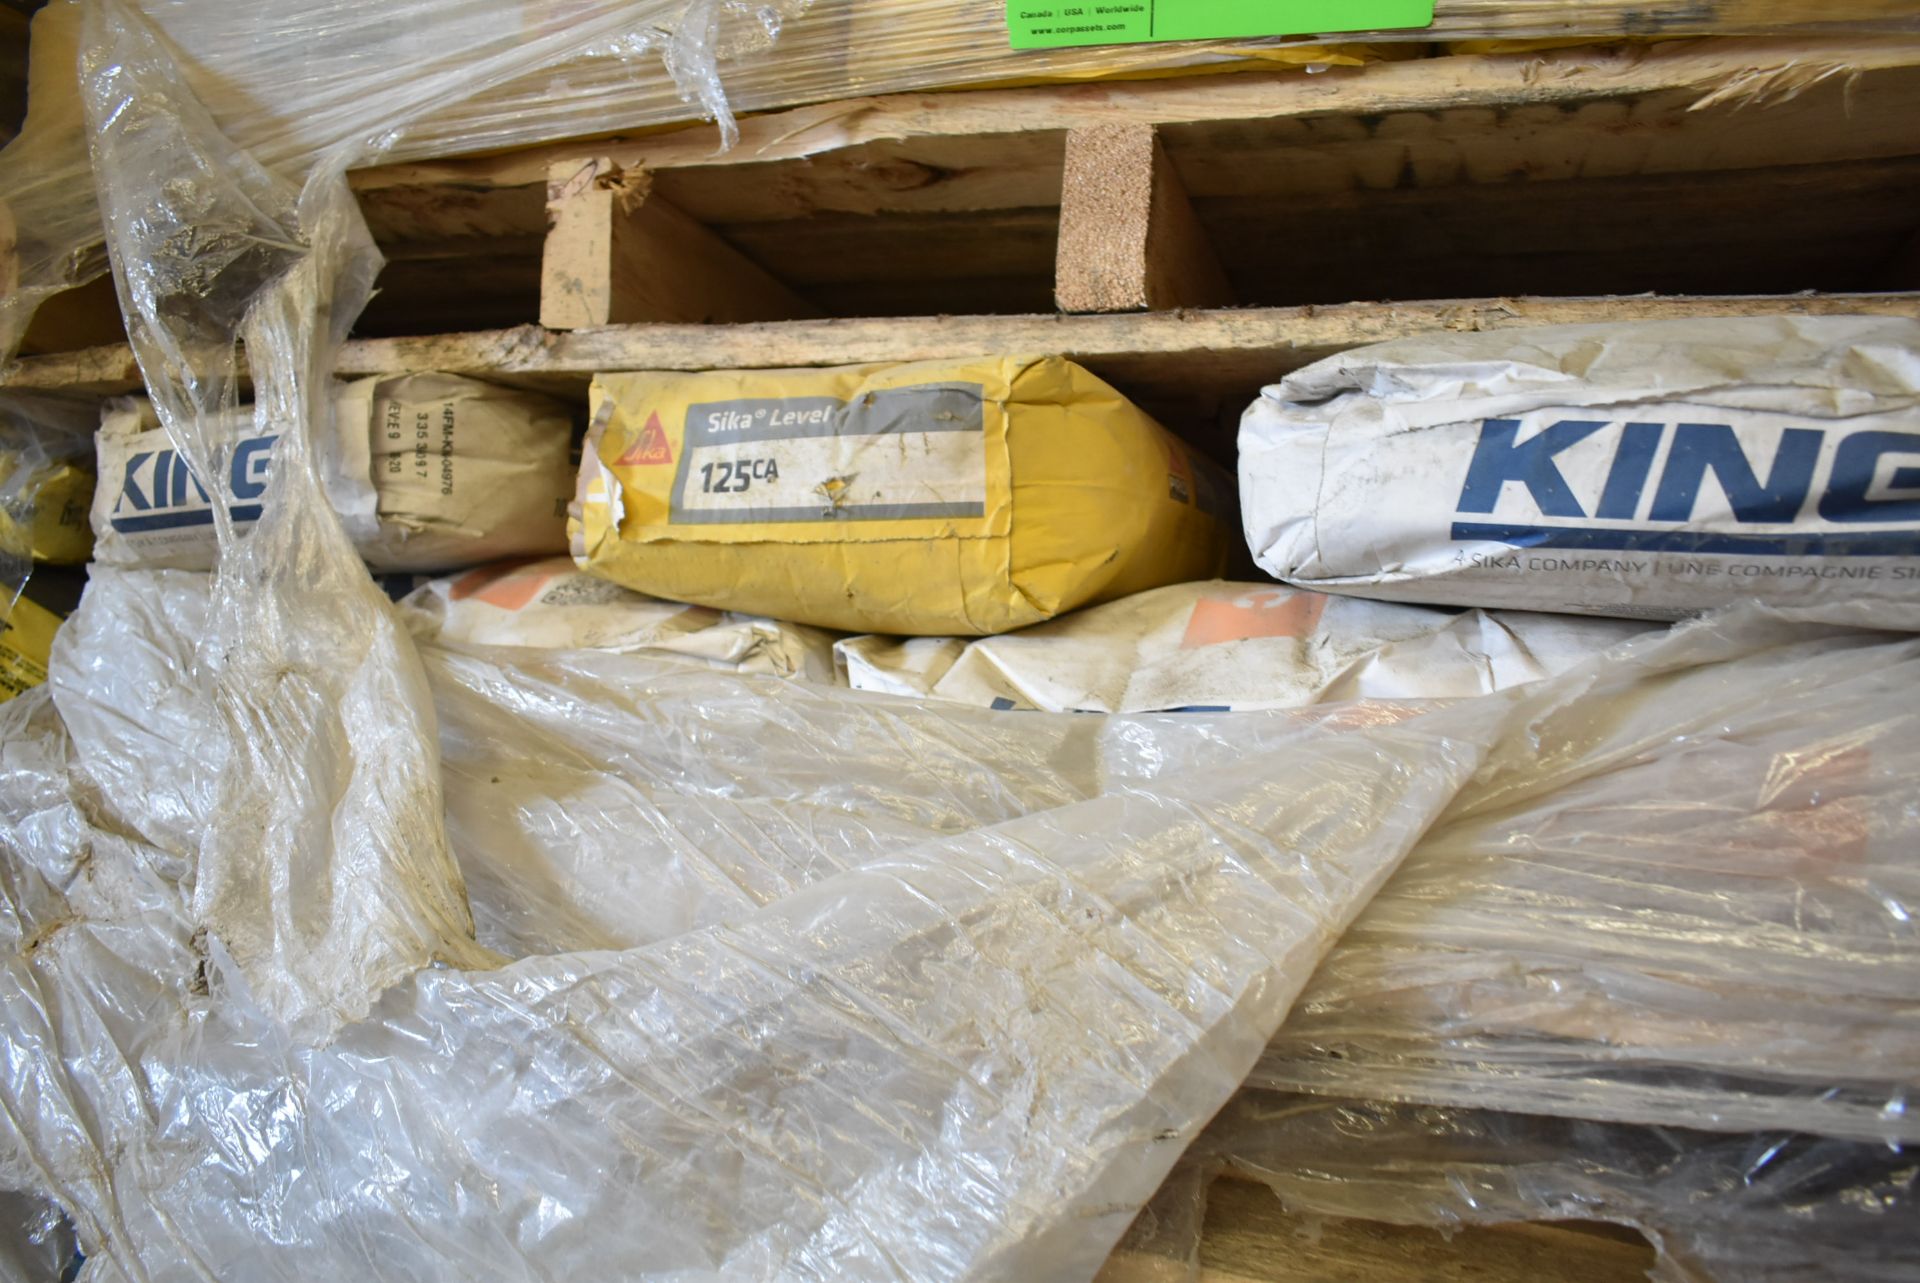 LOT/ PALLET WITH CONTENTS CONSISTING OF SAKRETE GIKA SIKA GROUT & SILKA GROUT 212 - Image 3 of 3